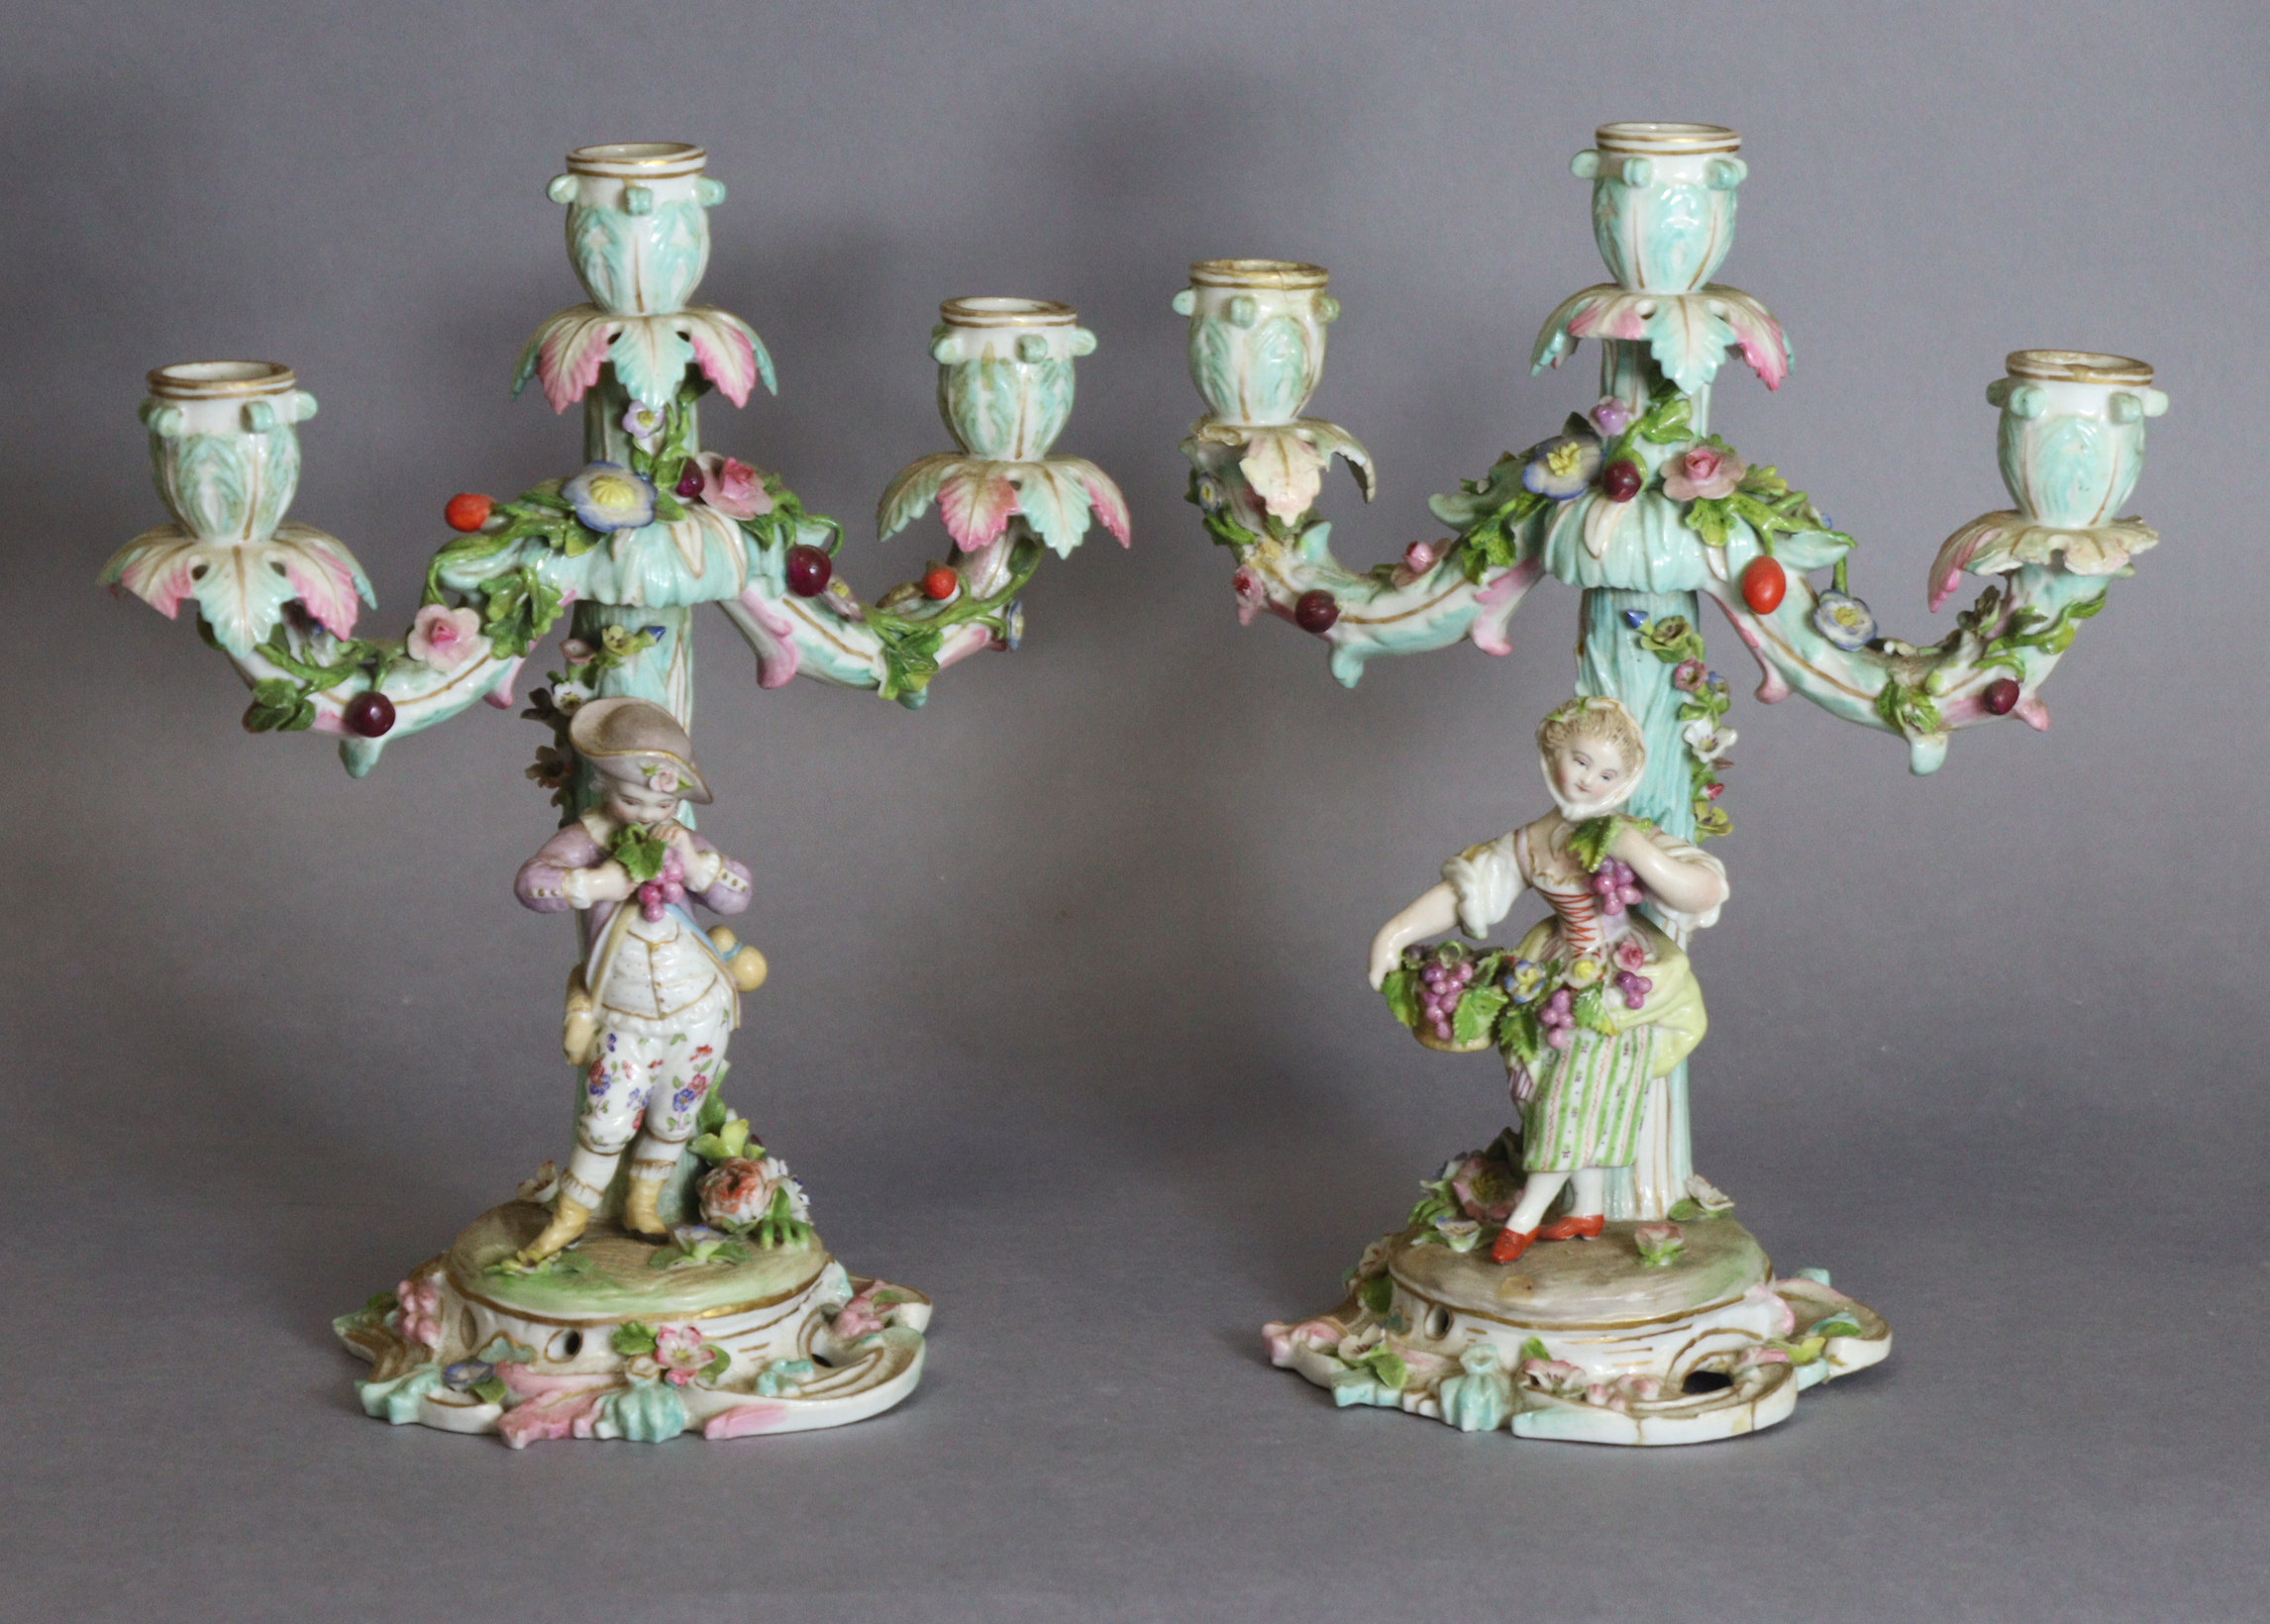 A pair of Meissen porcelain three-branch floral-encrusted candelabra, one with a girl holding a